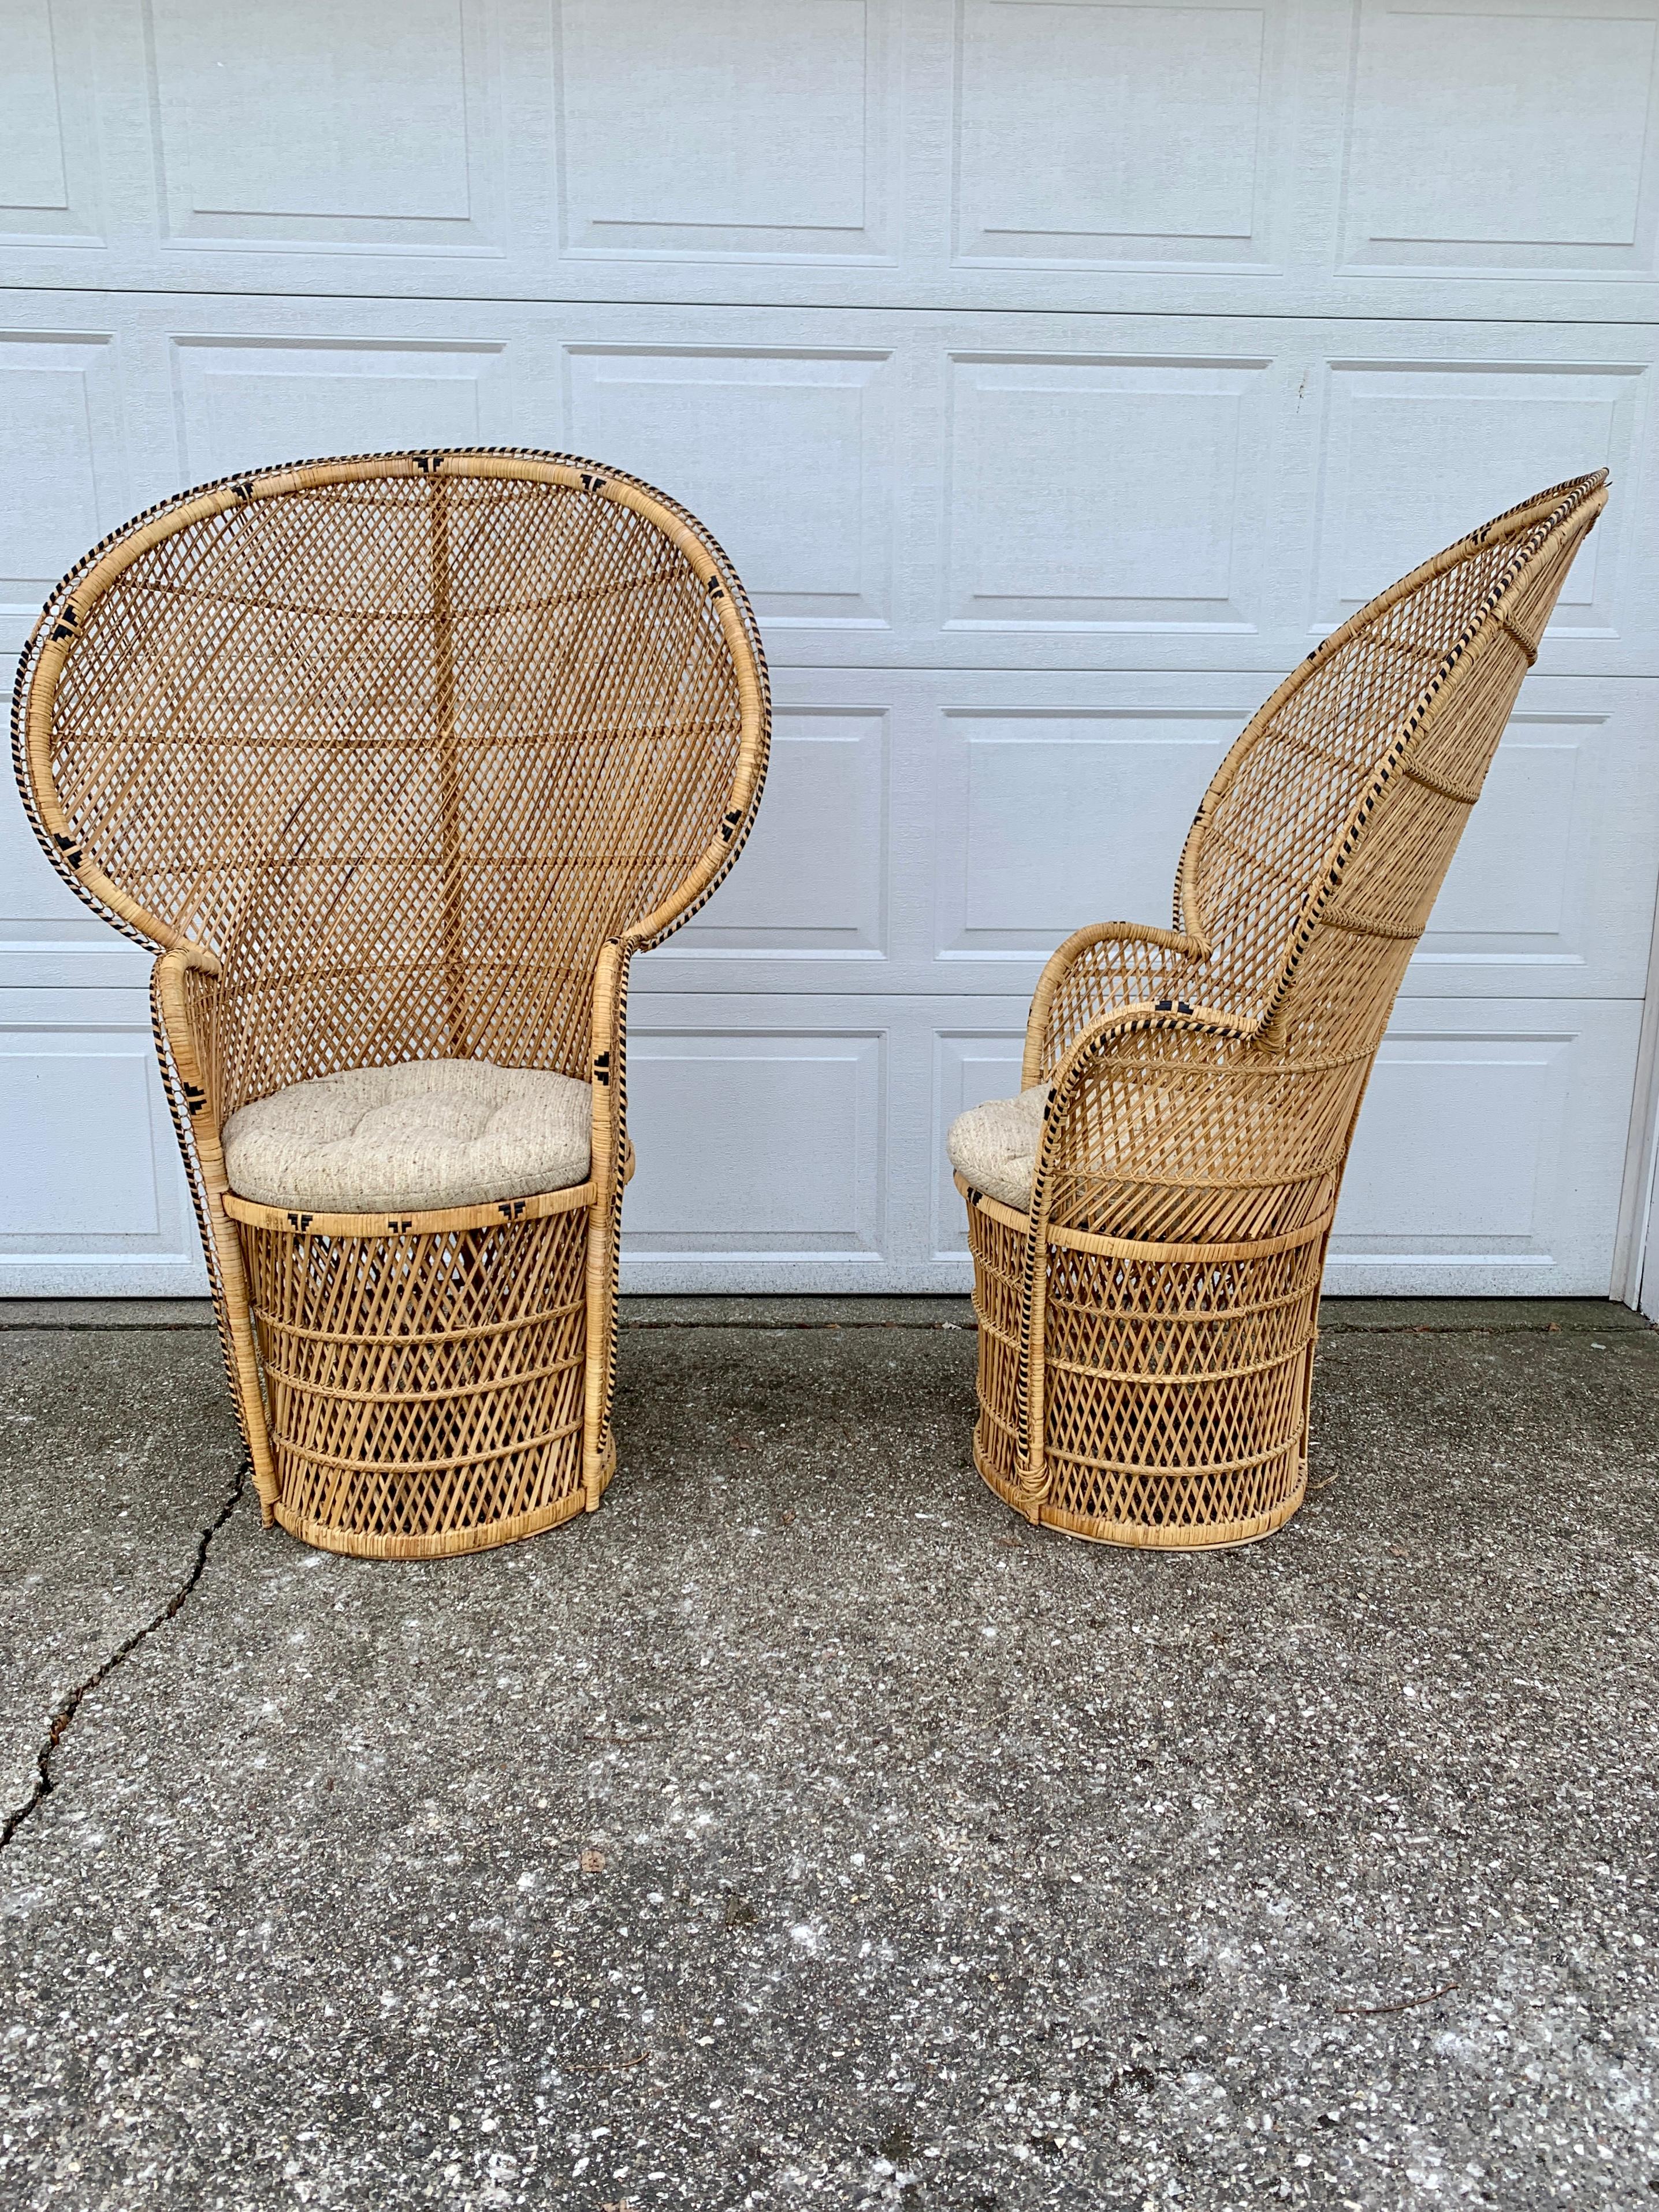 Bohemian Wicker Emanuelle Peacock Chairs, Pair For Sale 5